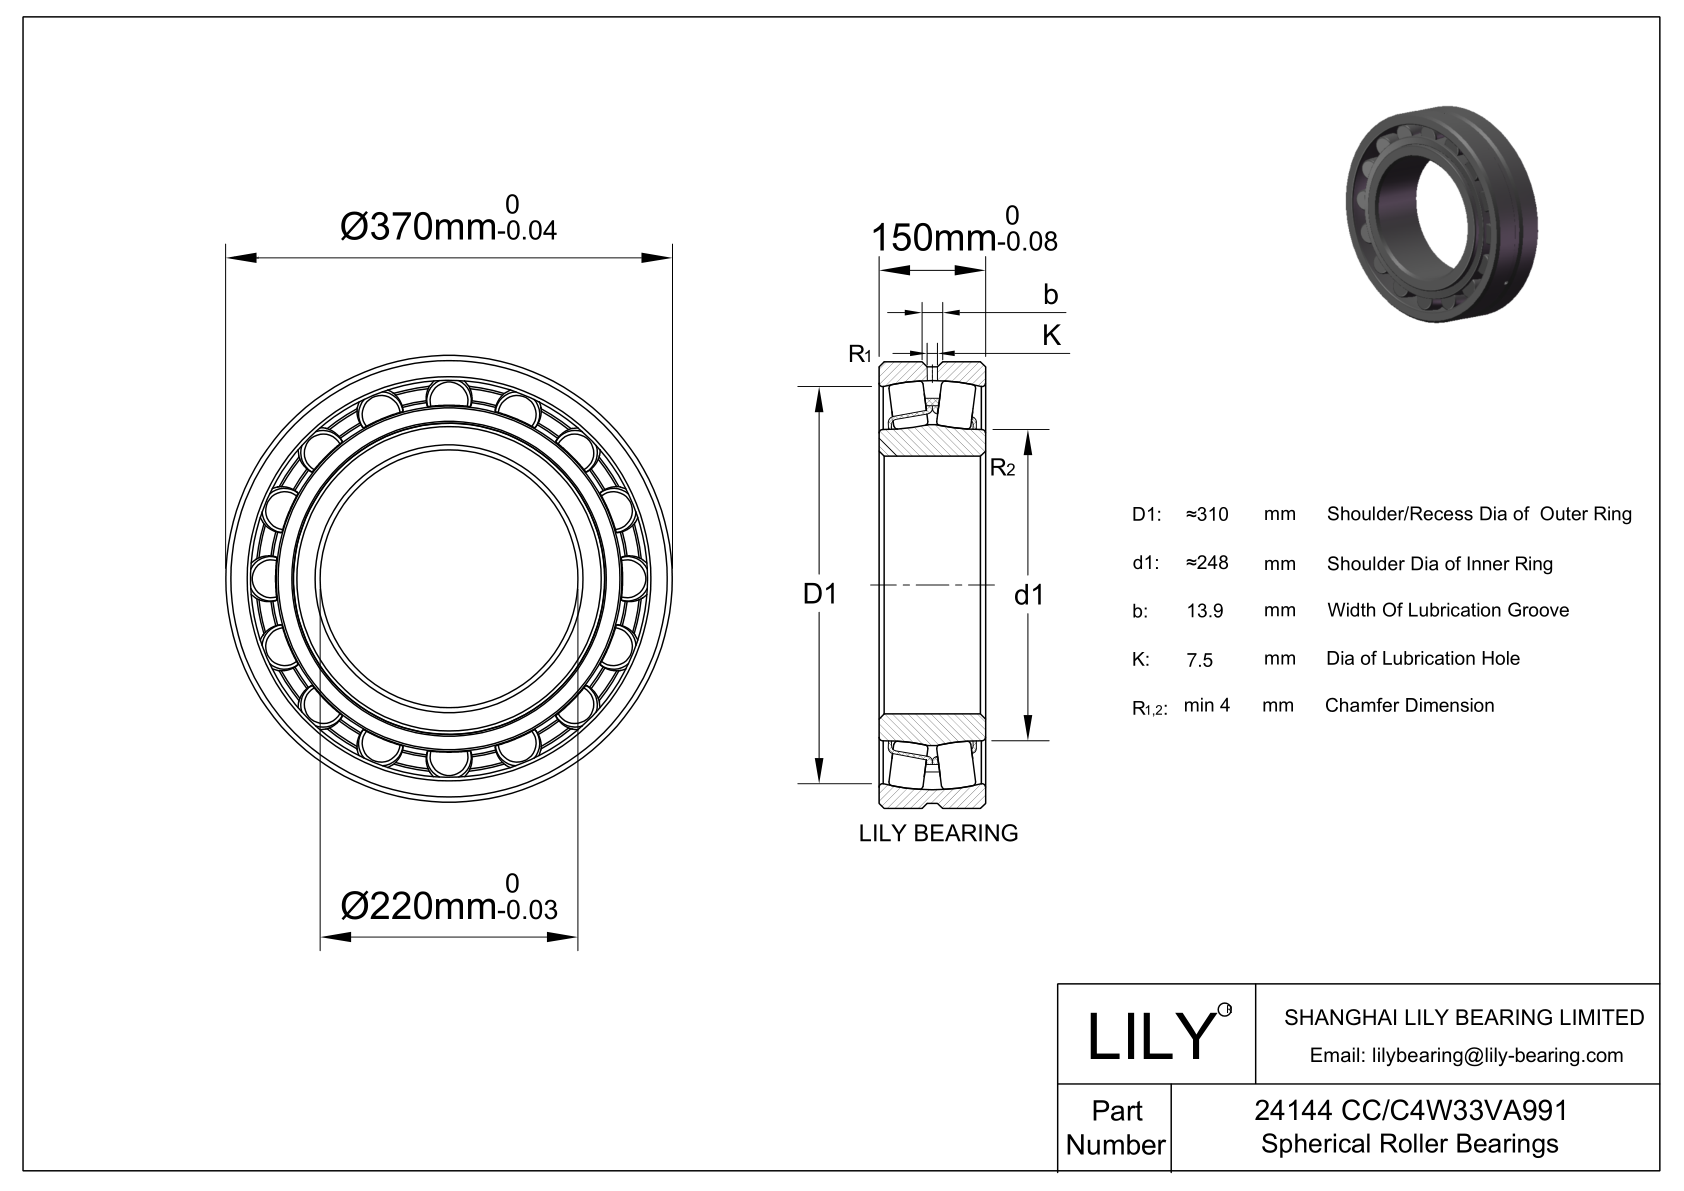 24144 CC/C4W33VA991 Double Row Spherical Roller Bearing cad drawing